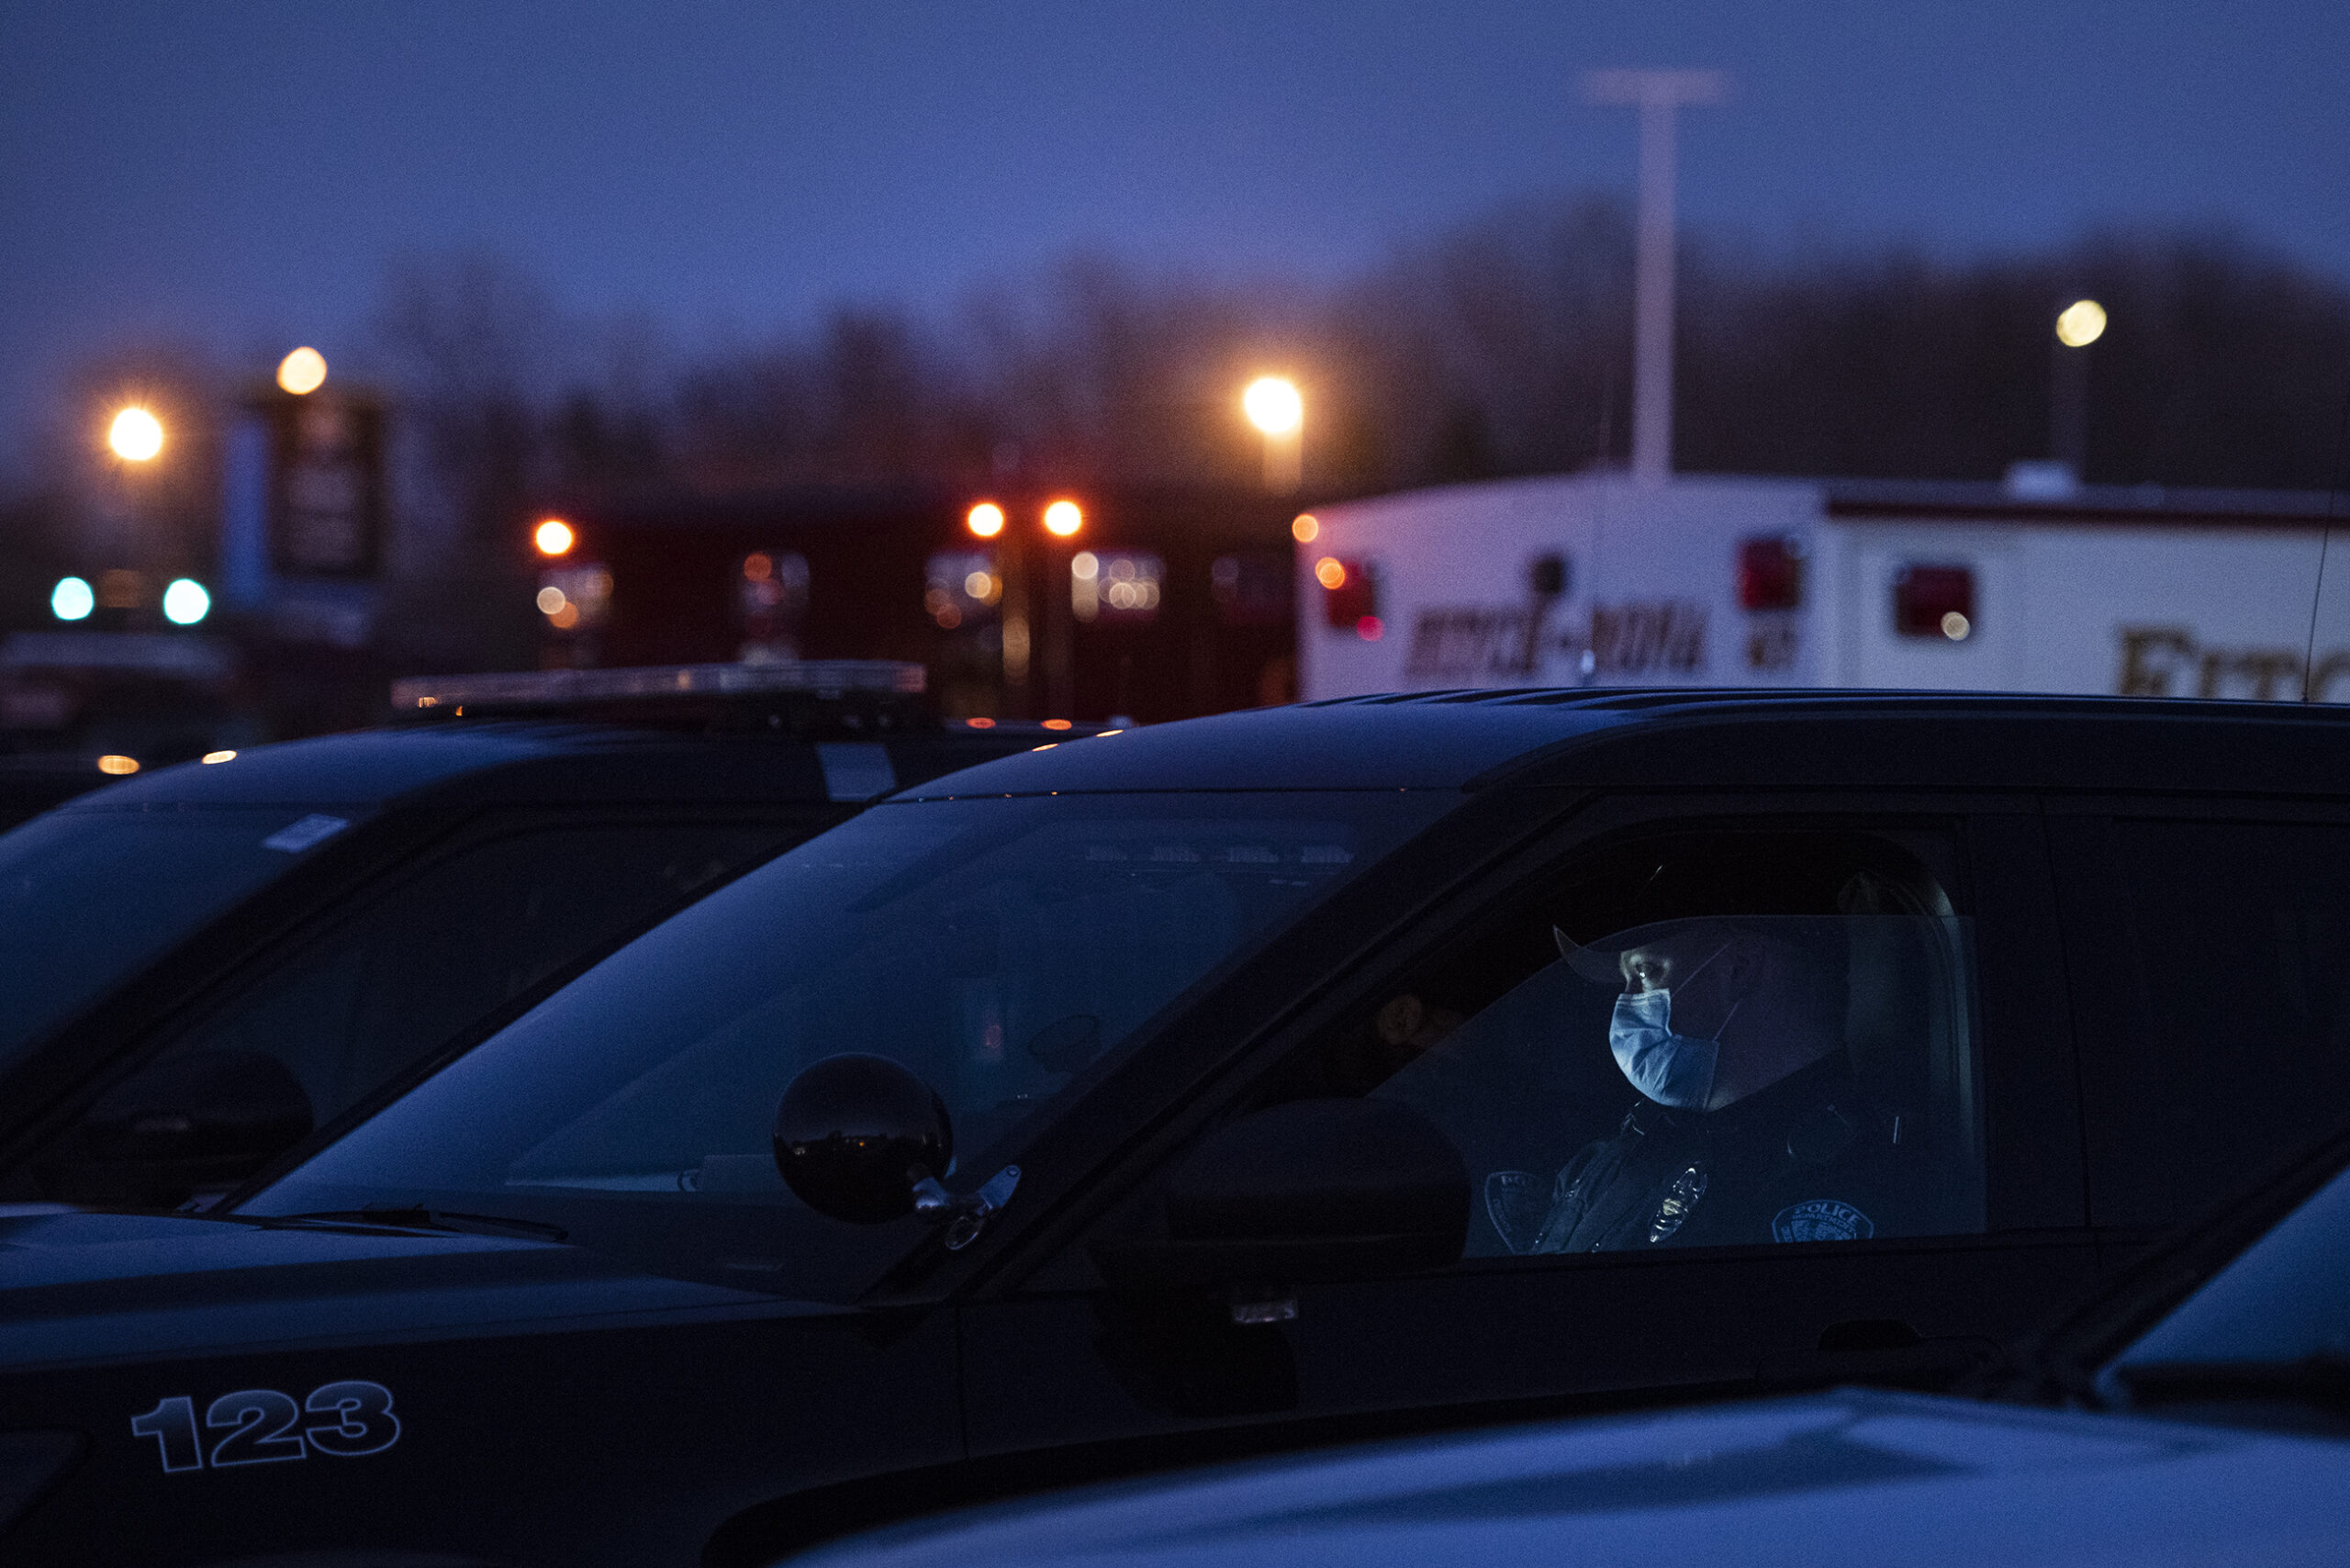 A police officer in a mask sits in a vehicle as the sky goes dark.